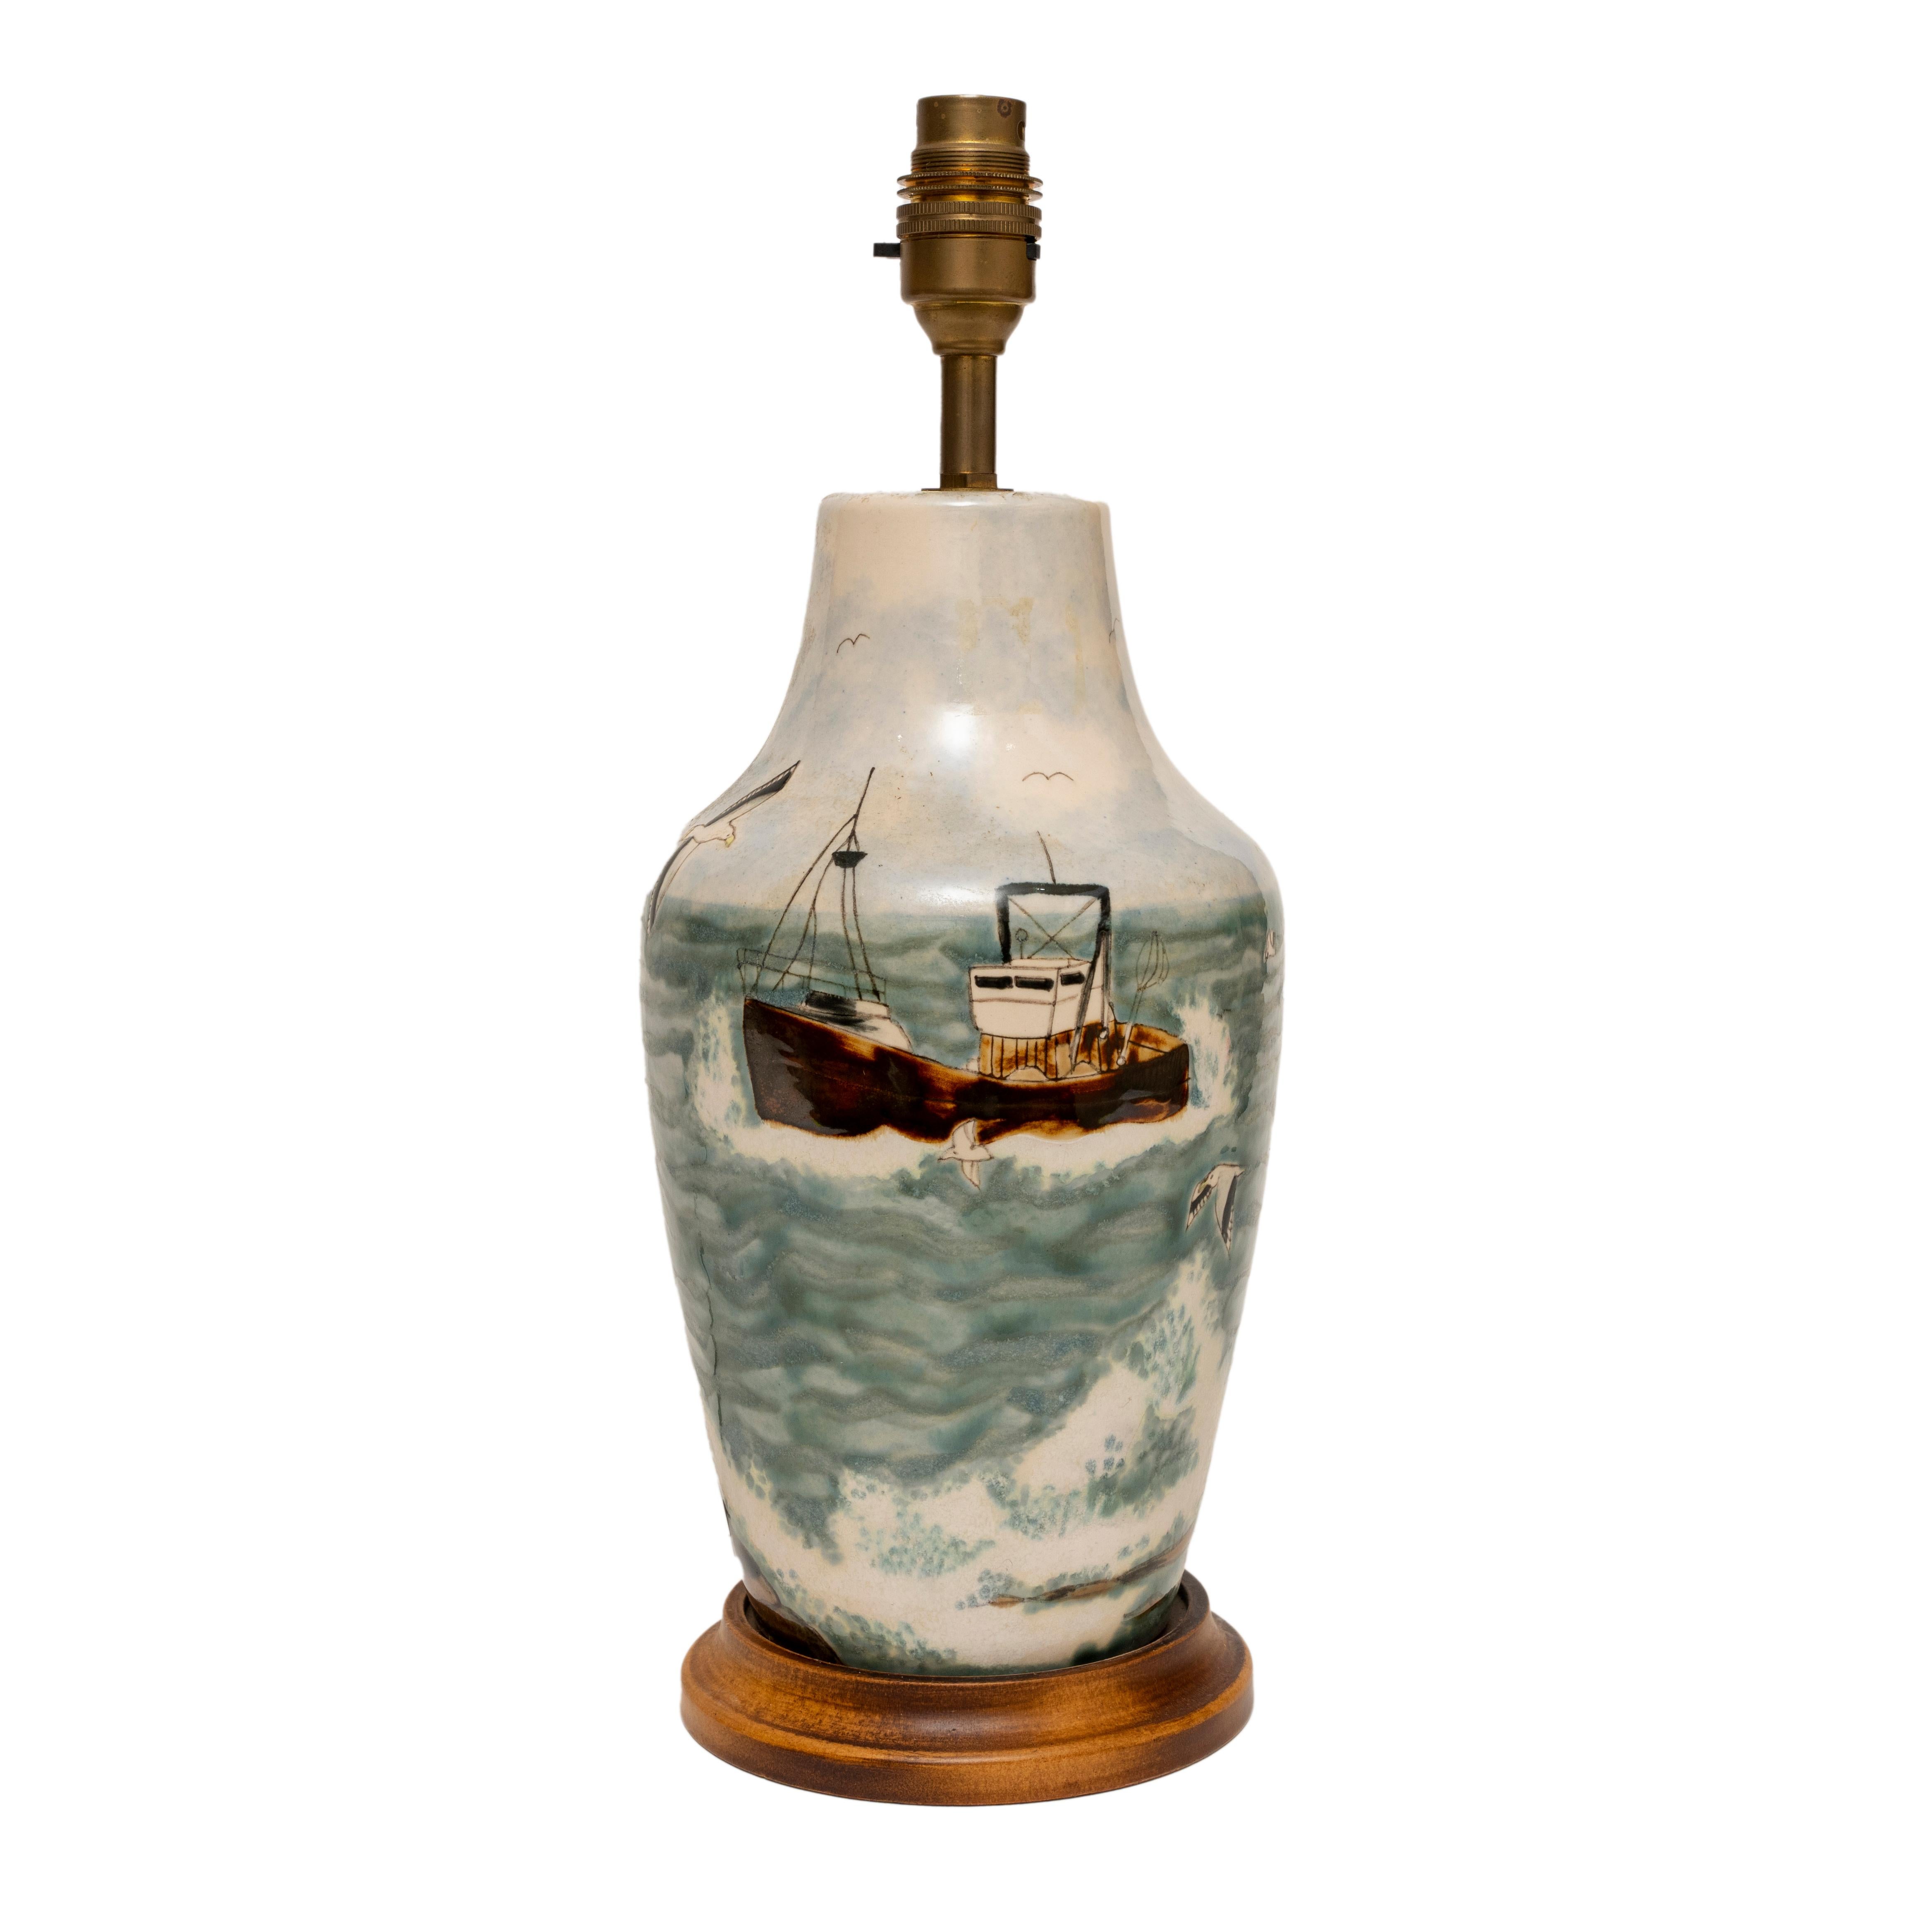 COBRIDGE STONEWARE TRAWLER AT SEA, SEAGULLS, ROCK TABLE LAMP, 37cm., 14½” high
Captures the atmosphere of a trawler returning to port accompanied by seagulls 
Of interest to the maritime or seaside enthusiast or Cobridge collectors
Realistically